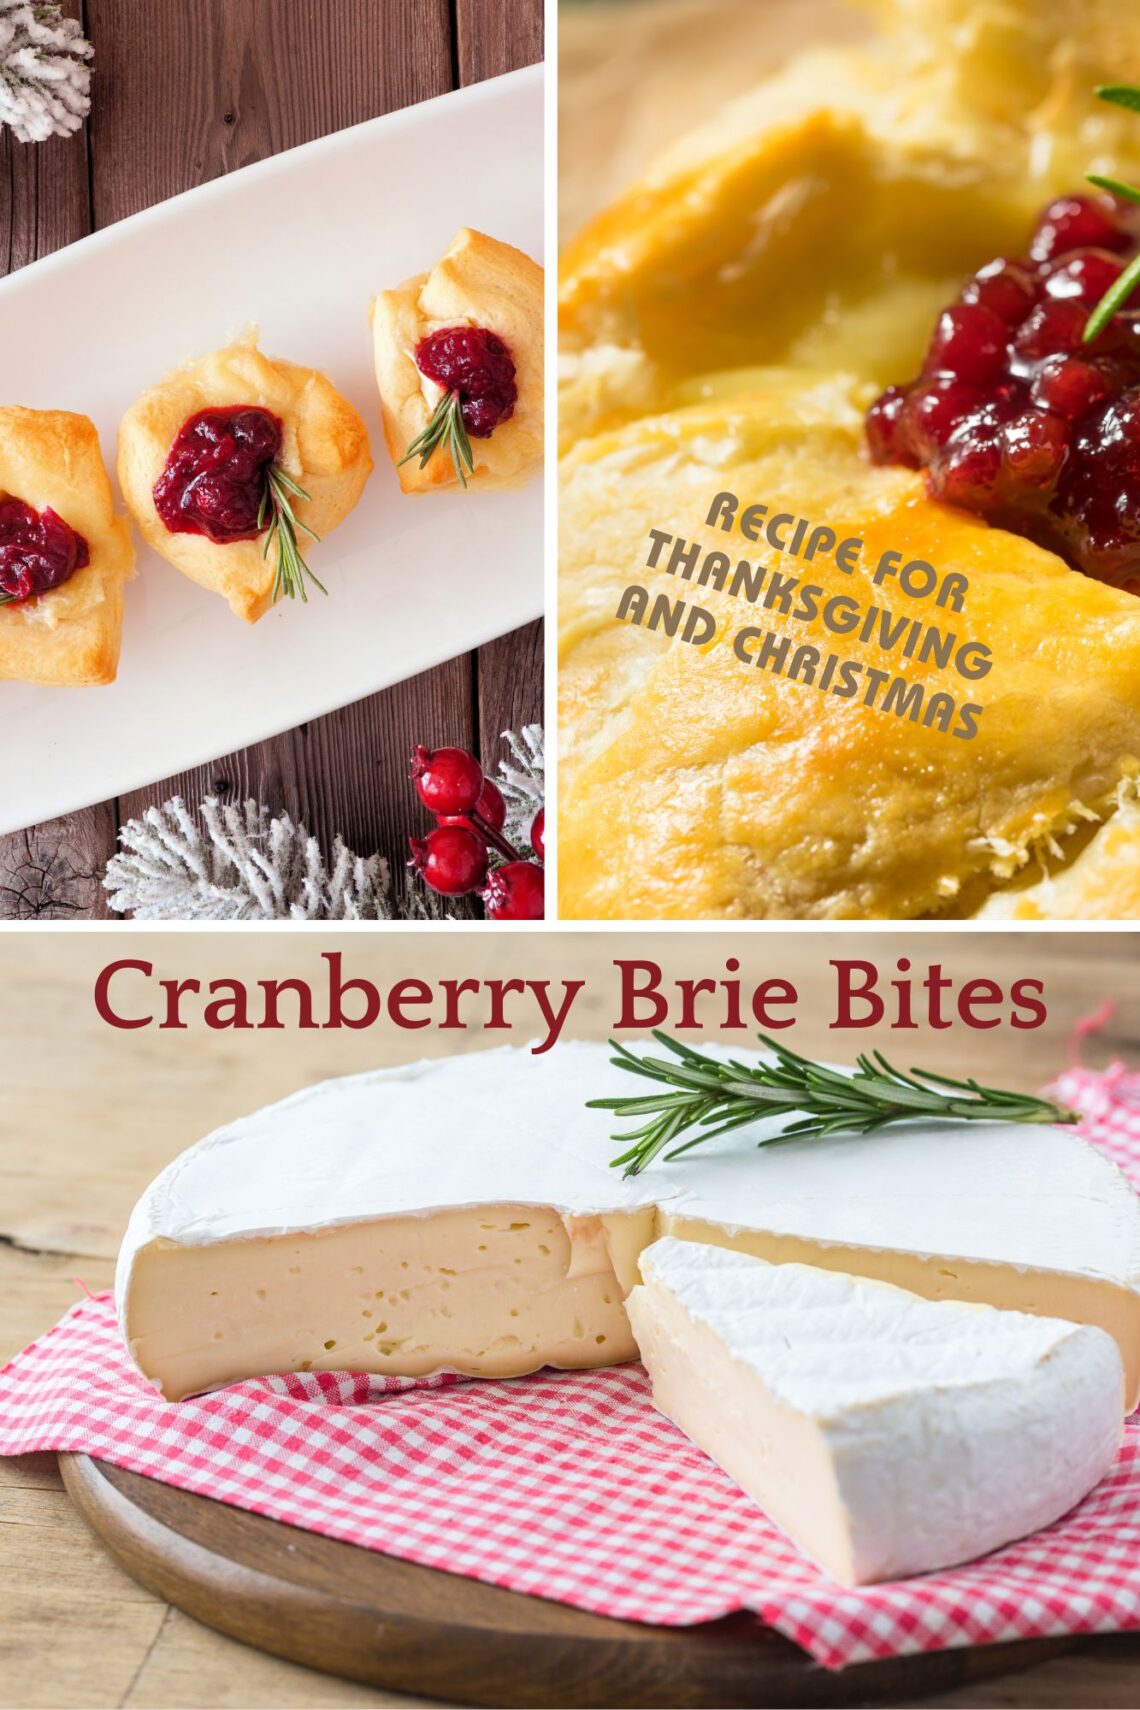 Thanksgiving recipes Christmas recipes New Brie Bites with Cranberry or multiple filling options